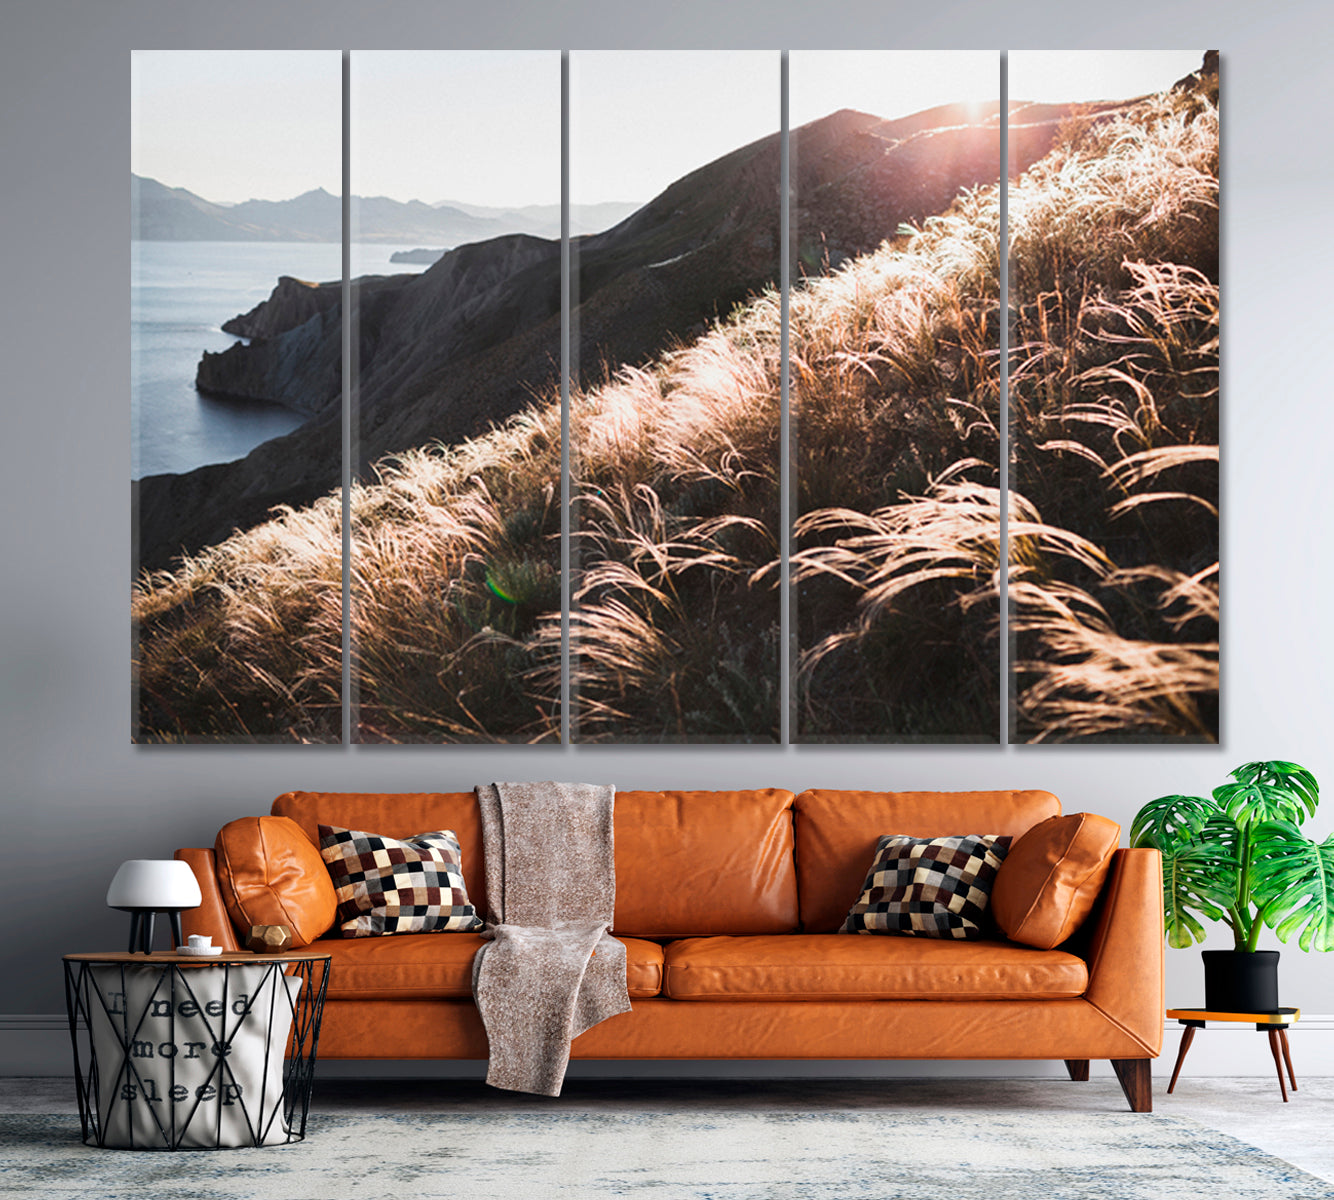 Sunset Coastline Landscape Hill Incredible Spring Field Feather Grass Nature Wall Canvas Print Artesty 5 panels 36" x 24" 